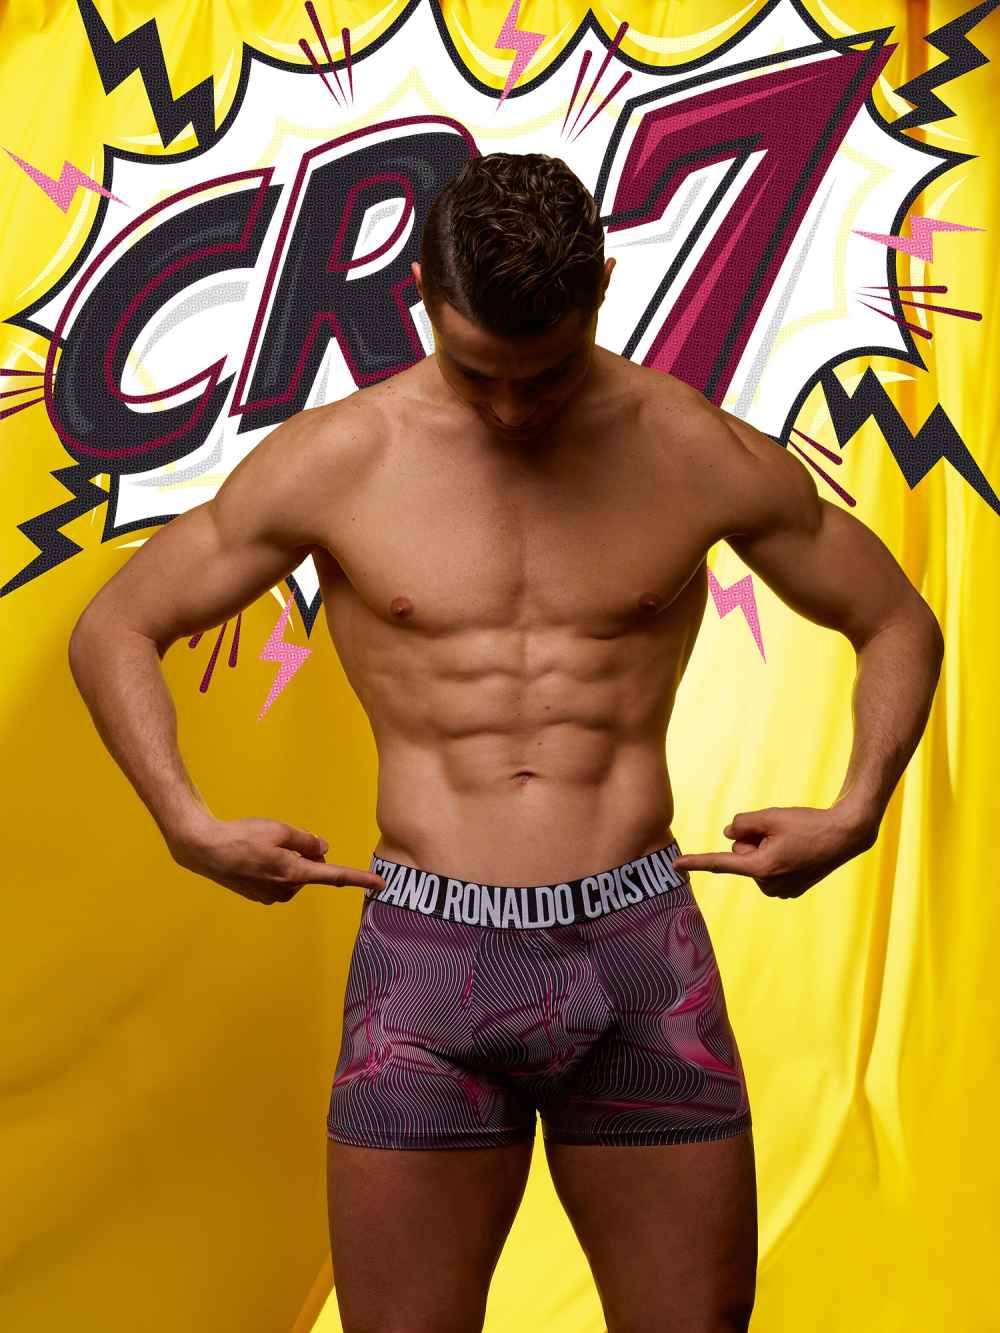 Ronaldo struts his 'skills' as he models for his new CR7 underwear